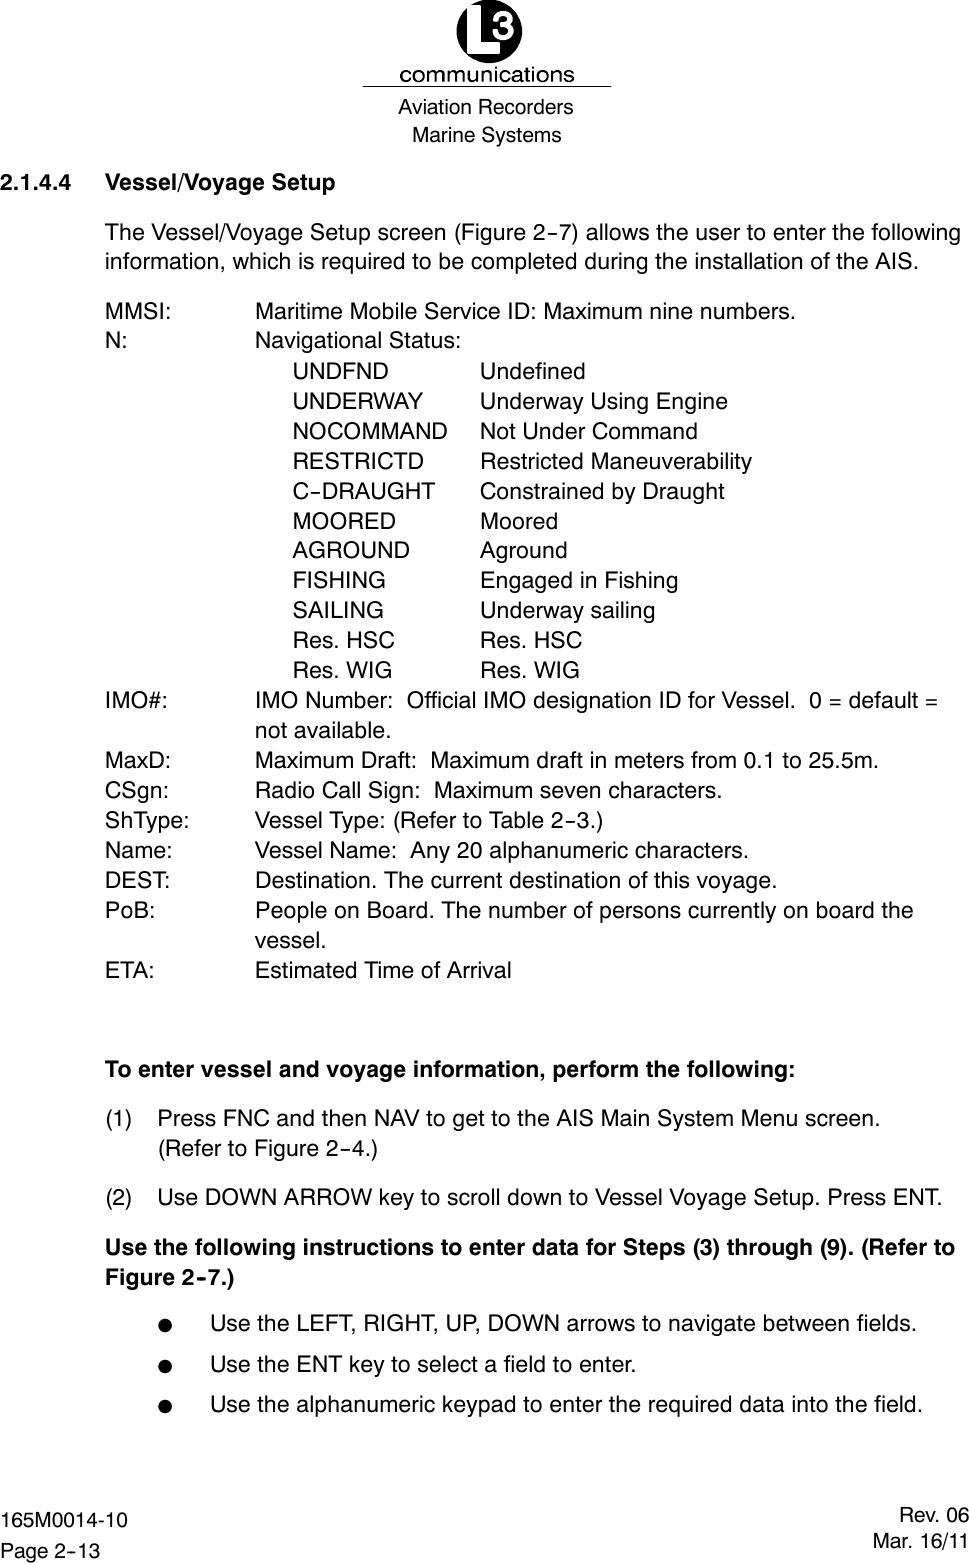 Marine SystemsAviation RecordersRev. 06Mar. 16/11165M0014-10Page 2--132.1.4.4 Vessel/Voyage SetupThe Vessel/Voyage Setup screen (Figure 2--7) allows the user to enter the followinginformation, which is required to be completed during the installation of the AIS.MMSI: Maritime Mobile Service ID: Maximum nine numbers.N: Navigational Status:UNDFND UndefinedUNDERWAY Underway Using EngineNOCOMMAND Not Under CommandRESTRICTD Restricted ManeuverabilityC--DRAUGHT Constrained by DraughtMOORED MooredAGROUND AgroundFISHING Engaged in FishingSAILING Underway sailingRes. HSC Res. HSCRes. WIG Res. WIGIMO#: IMO Number: Official IMO designation ID for Vessel. 0 = default =not available.MaxD: Maximum Draft: Maximum draft in meters from 0.1 to 25.5m.CSgn: Radio Call Sign: Maximum seven characters.ShType: Vessel Type: (Refer to Table 2--3.)Name: Vessel Name: Any 20 alphanumeric characters.DEST: Destination. The current destination of this voyage.PoB: People on Board. The number of persons currently on board thevessel.ETA: Estimated Time of ArrivalTo enter vessel and voyage information, perform the following:(1) Press FNC and then NAV to get to the AIS Main System Menu screen.(Refer to Figure 2--4.)(2) Use DOWN ARROW key to scroll down to Vessel Voyage Setup. Press ENT.Use the following instructions to enter data for Steps (3) through (9). (Refer toFigure 2--7.)FUse the LEFT, RIGHT, UP, DOWN arrows to navigate between fields.FUse the ENT key to select a field to enter.FUse the alphanumeric keypad to enter the required data into the field.